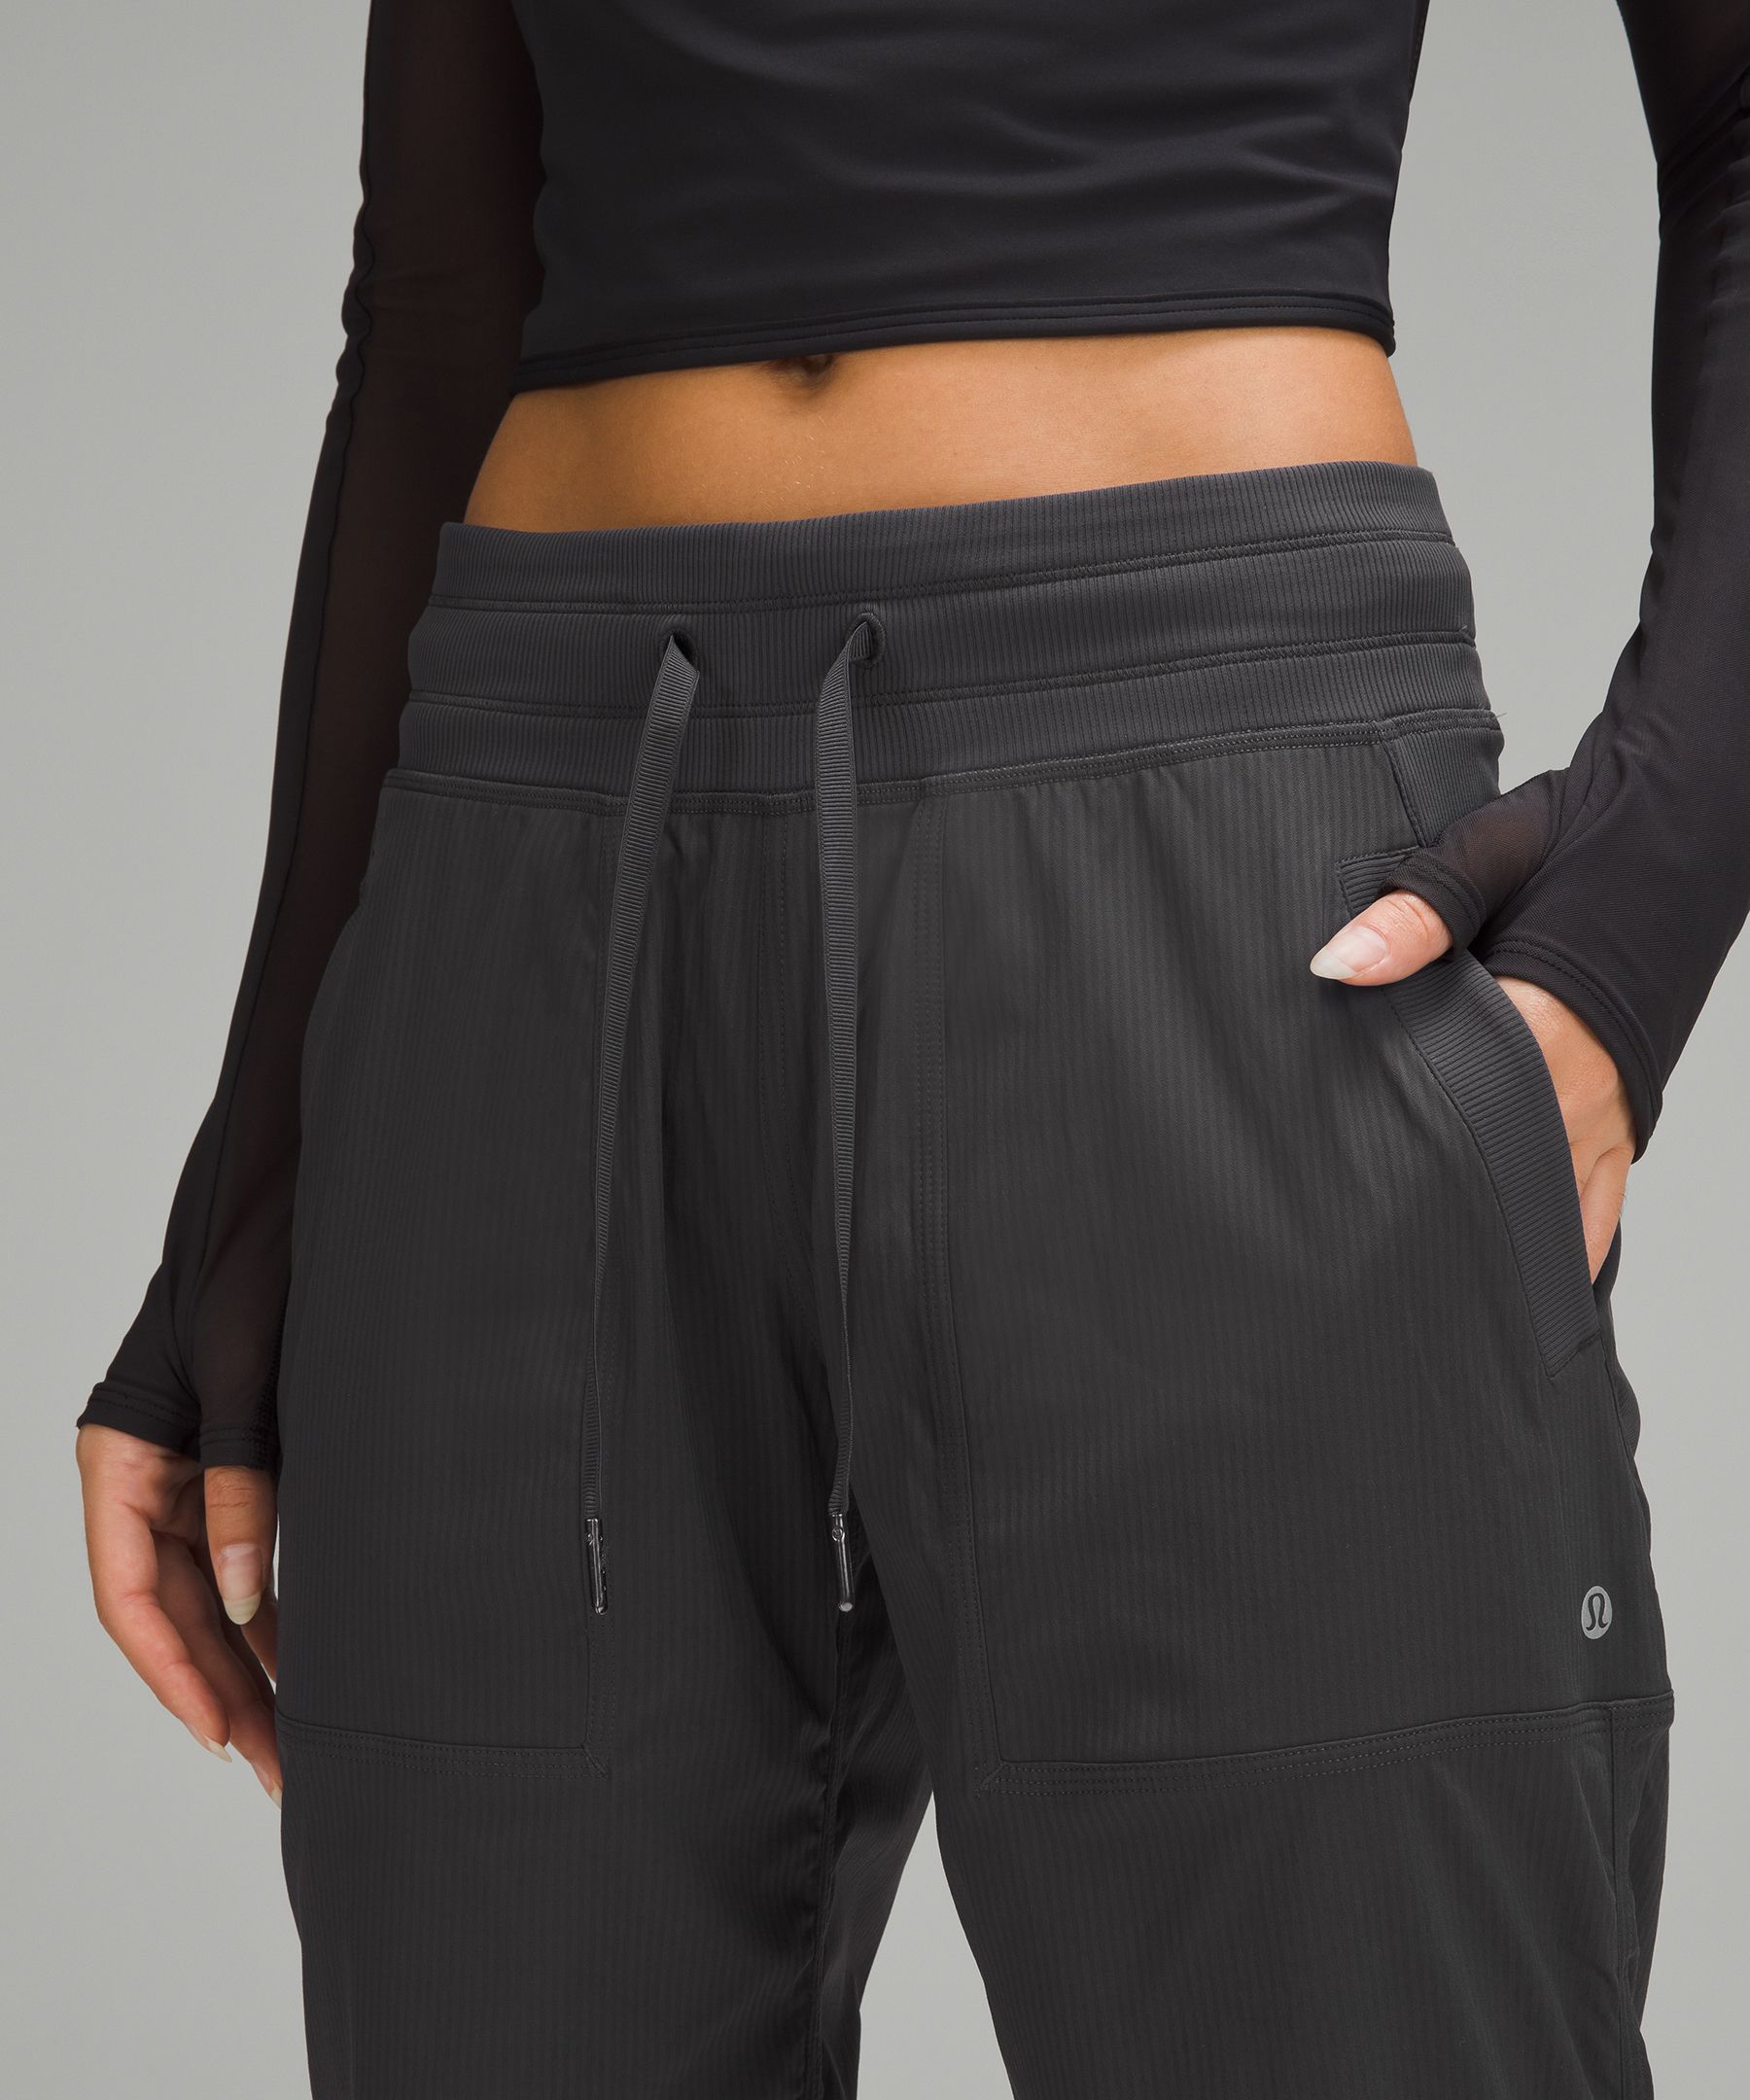 Find more Lululemon Dance Studio Pants Size 8 for sale at up to 90% off